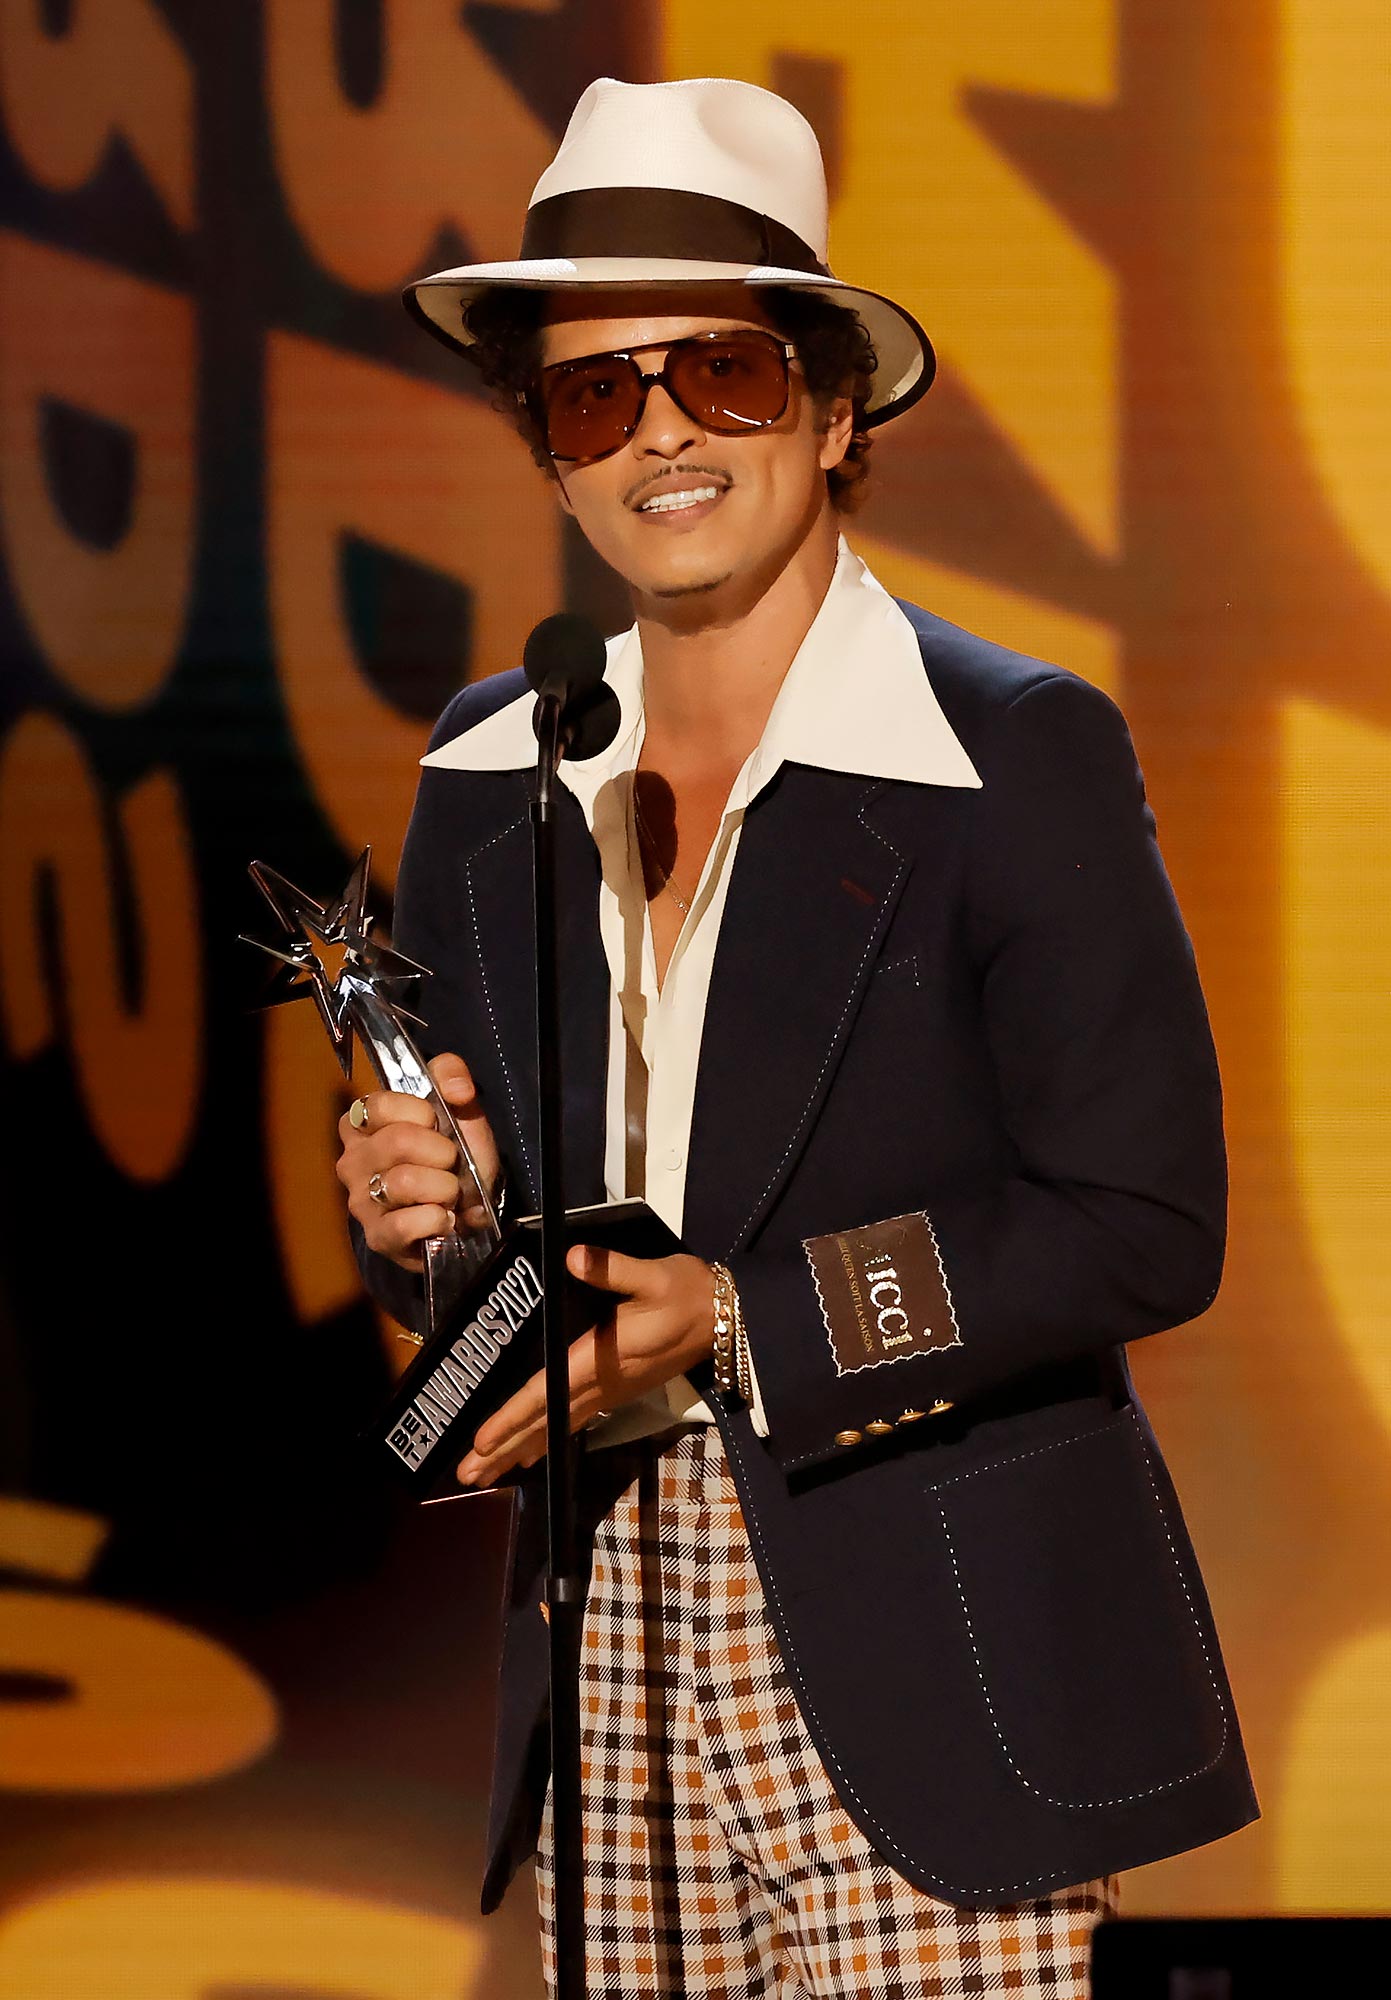 MGM Denies Reports That Bruno Mars Owes $50 Million in Gambling Debts: ‘Completely False’